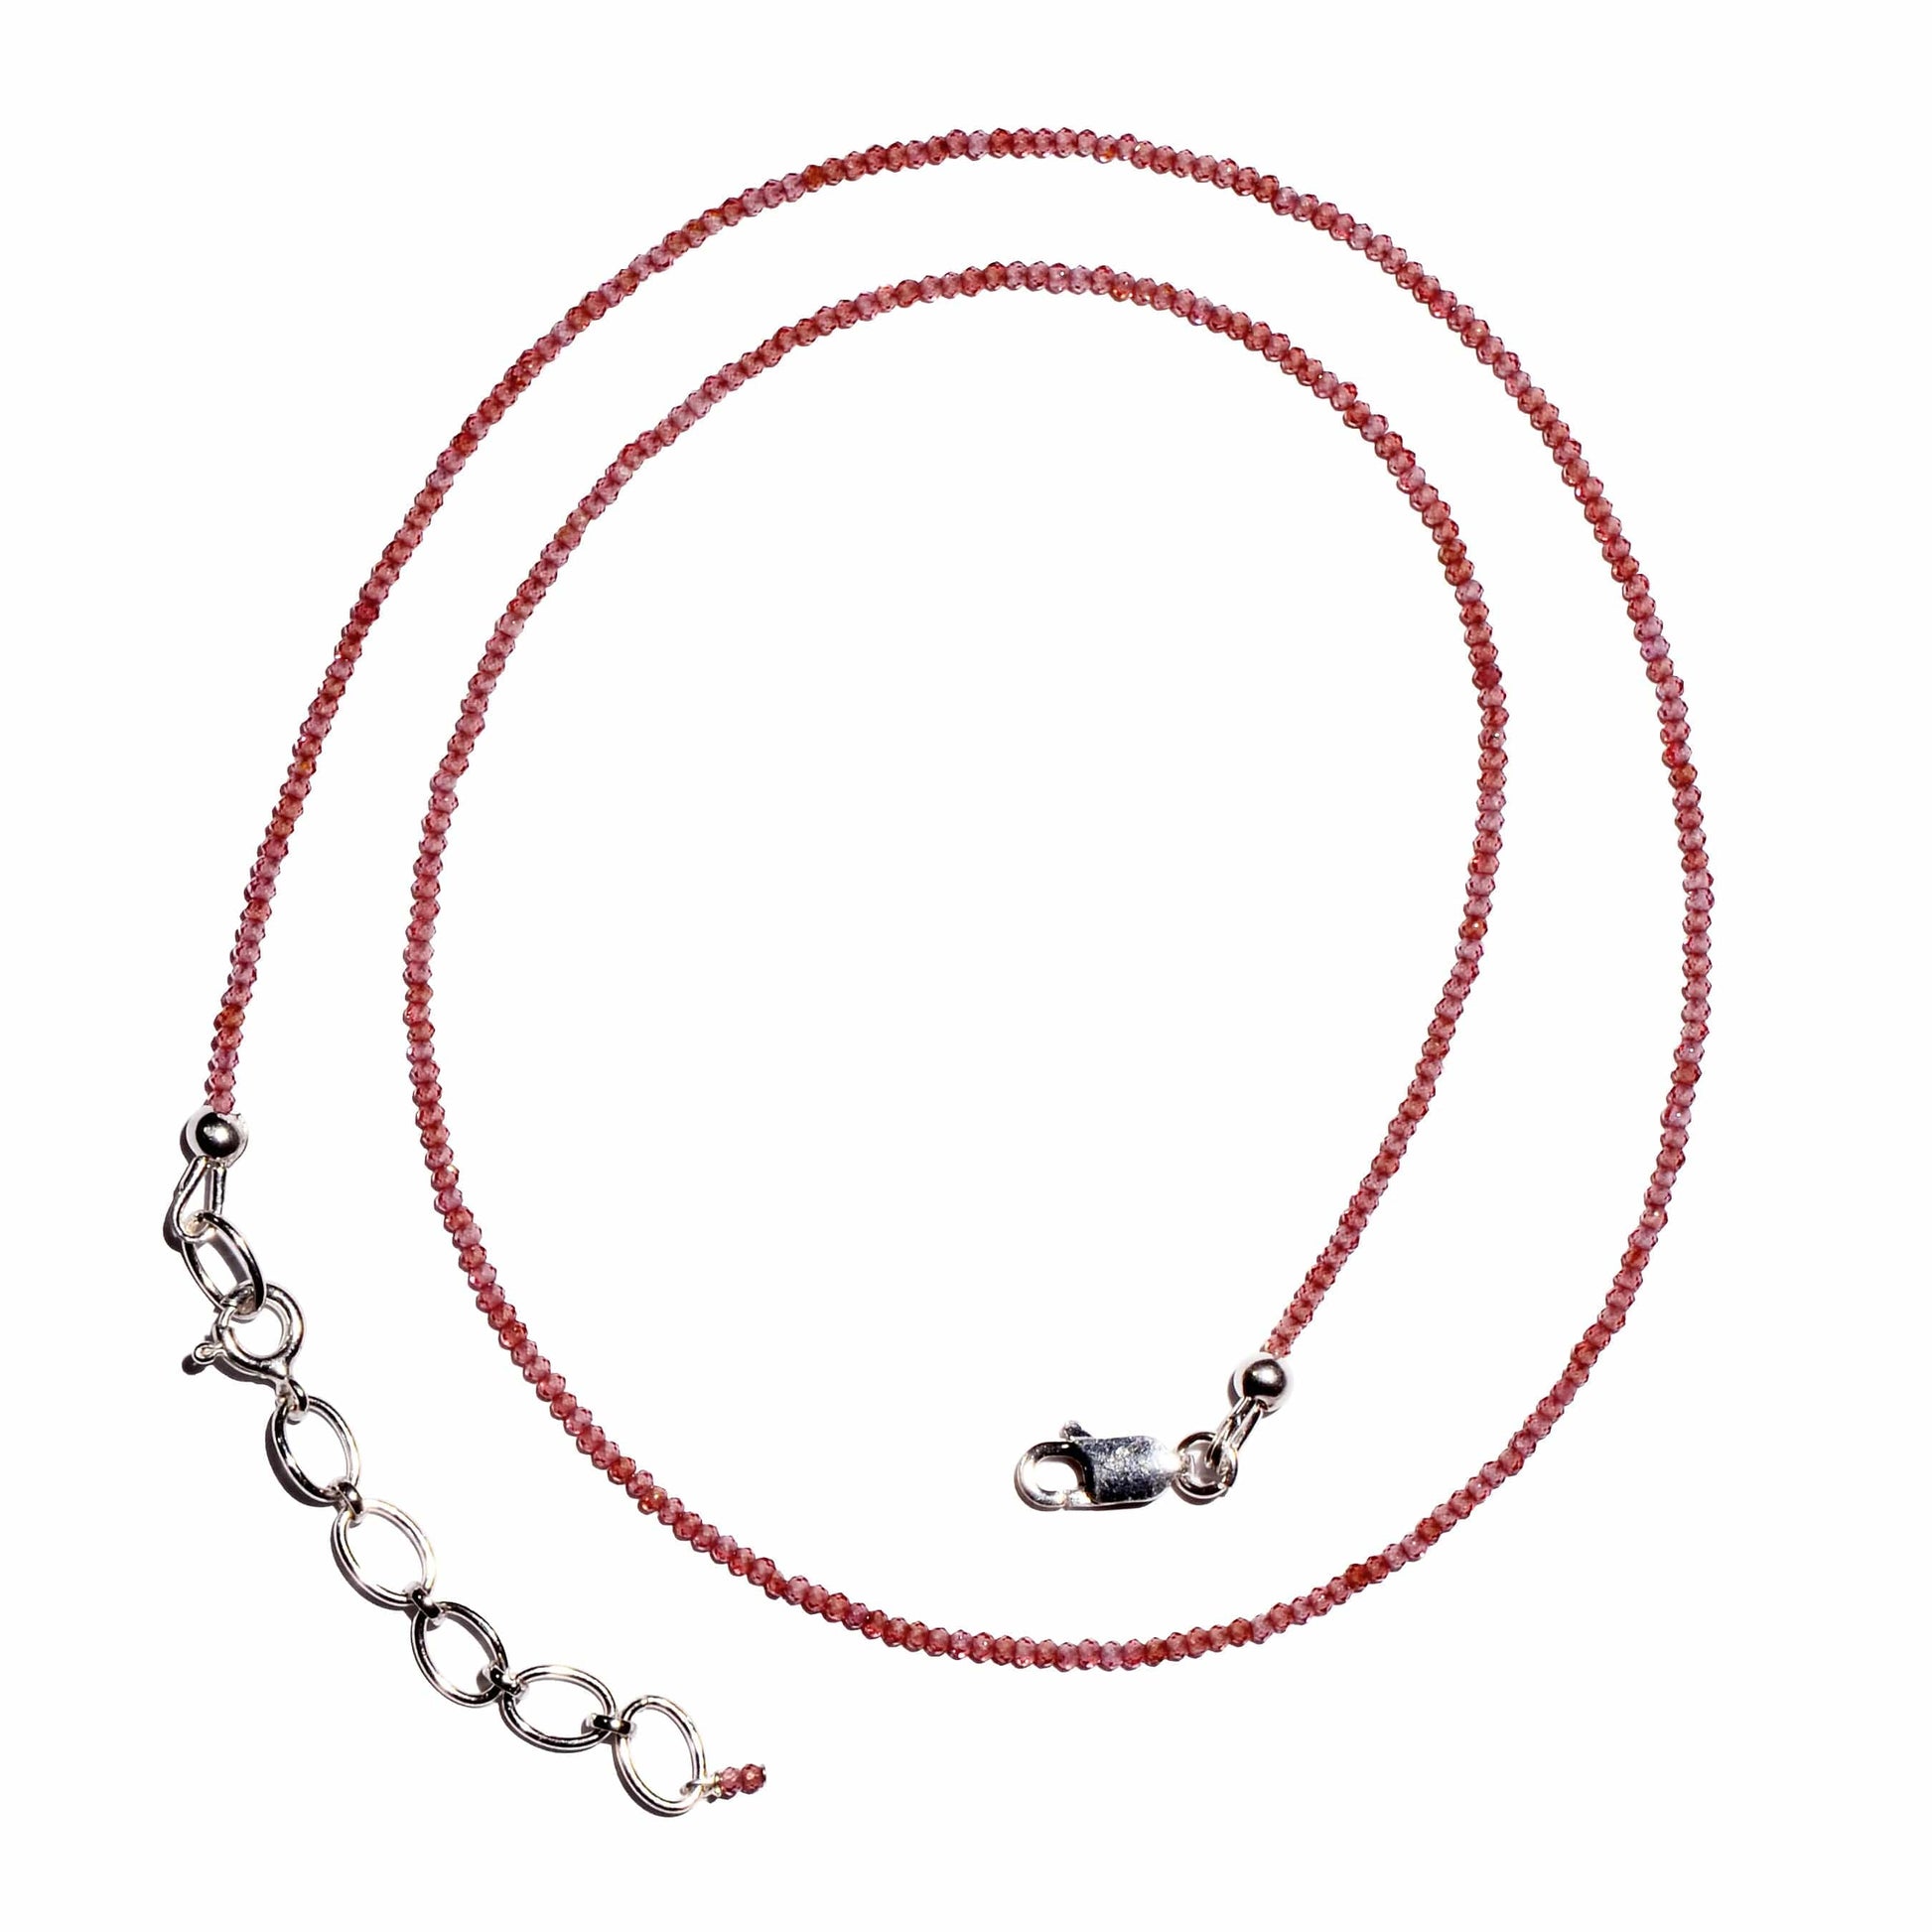 Buy Rhodolite Garnet Faceted Microbead Necklace 1.5mm for Inspiration and Emotional Healing.